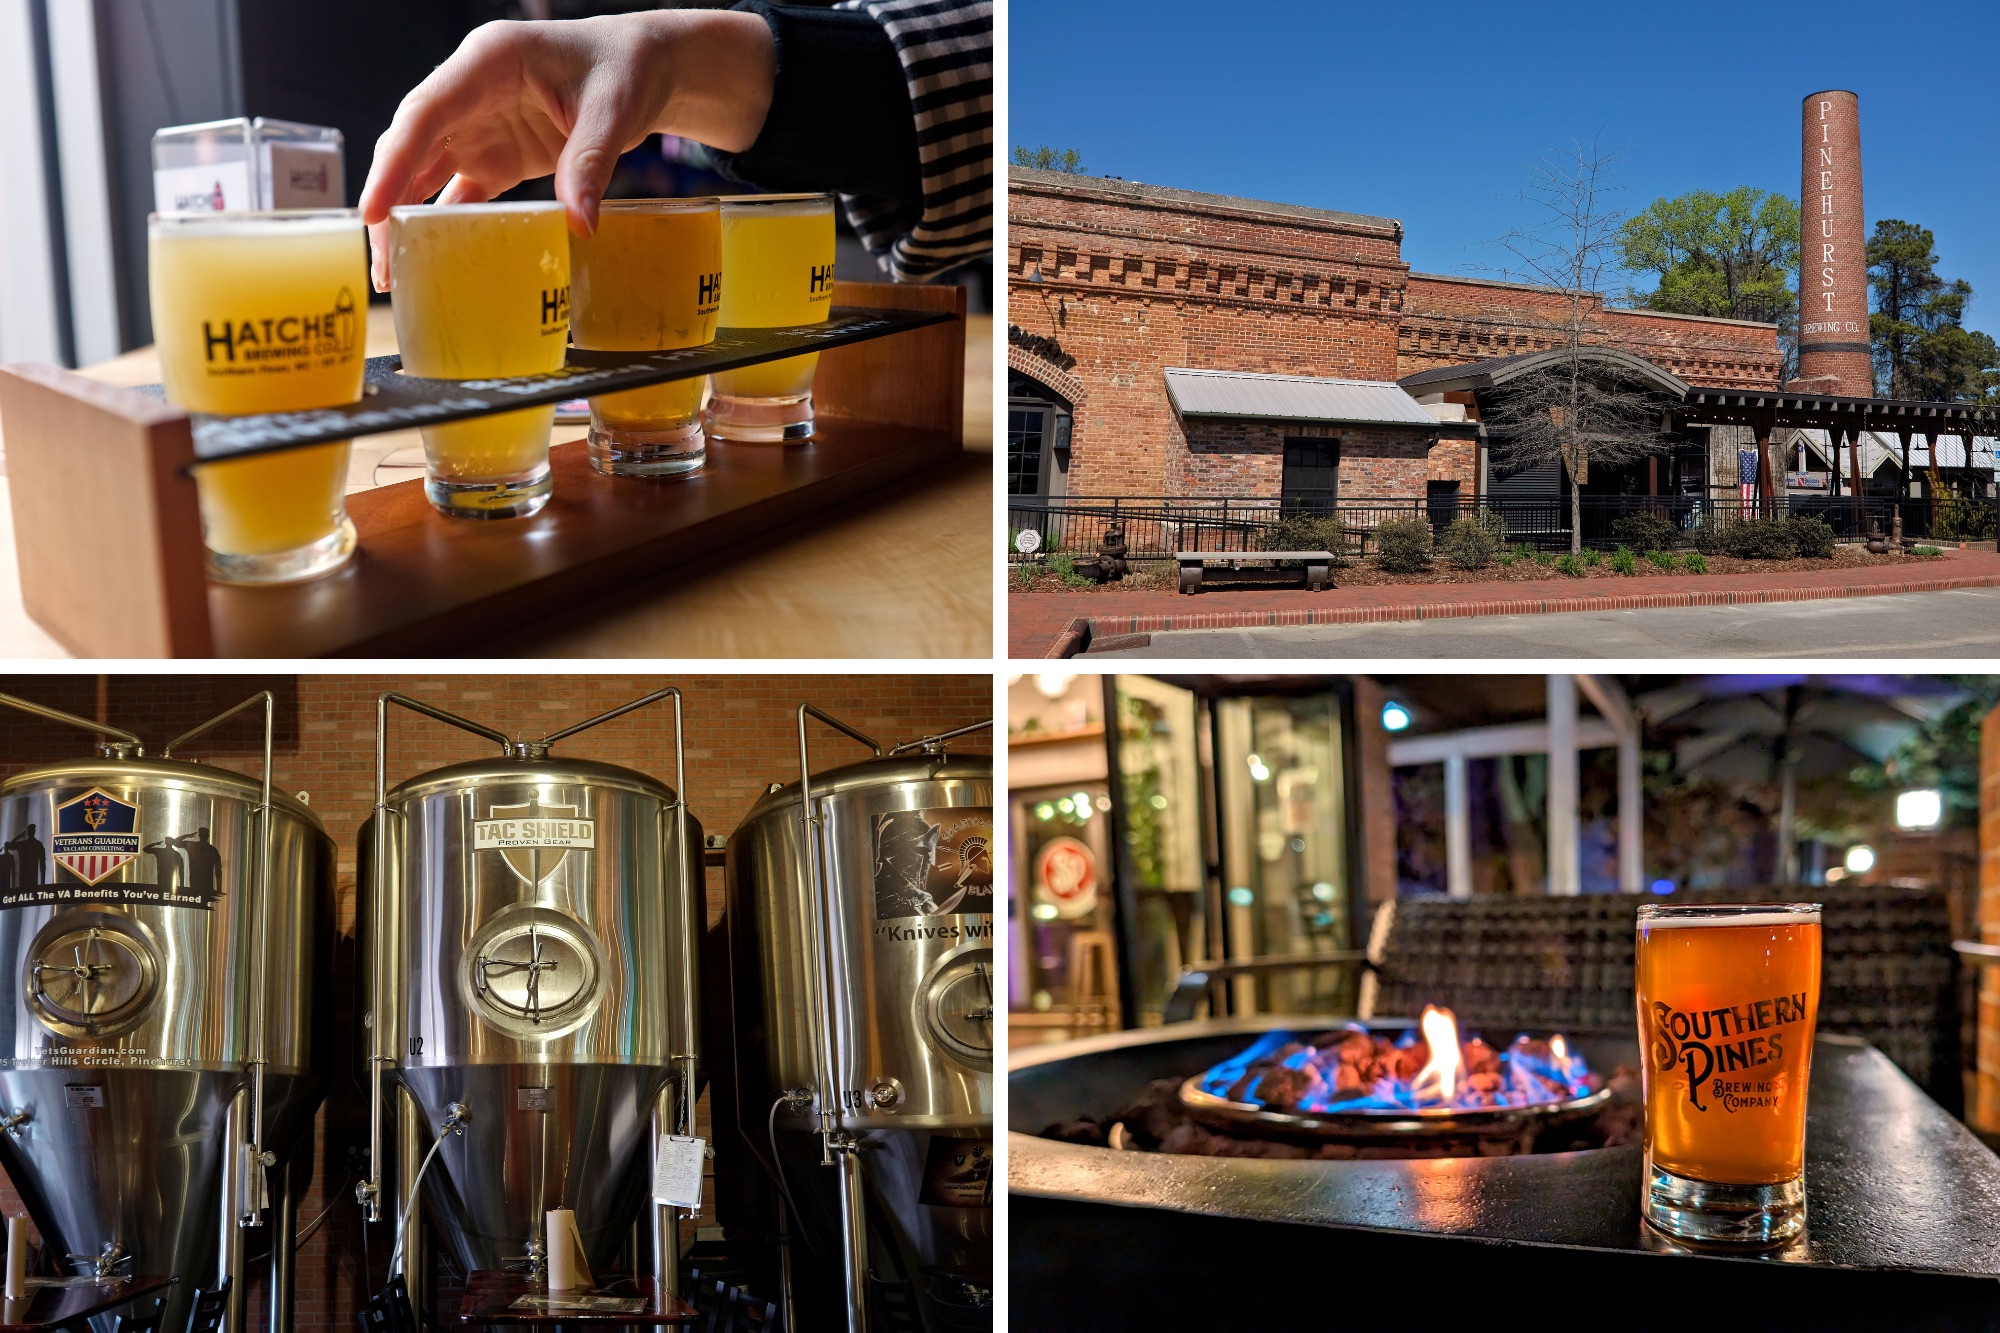 Four photos: Beer at Hatchet Brewery, the exterior of Pinehurst Brewing Co, tanks at Railhouse Brewery, and a glass next to the fire pit at Southern Pines Brewing